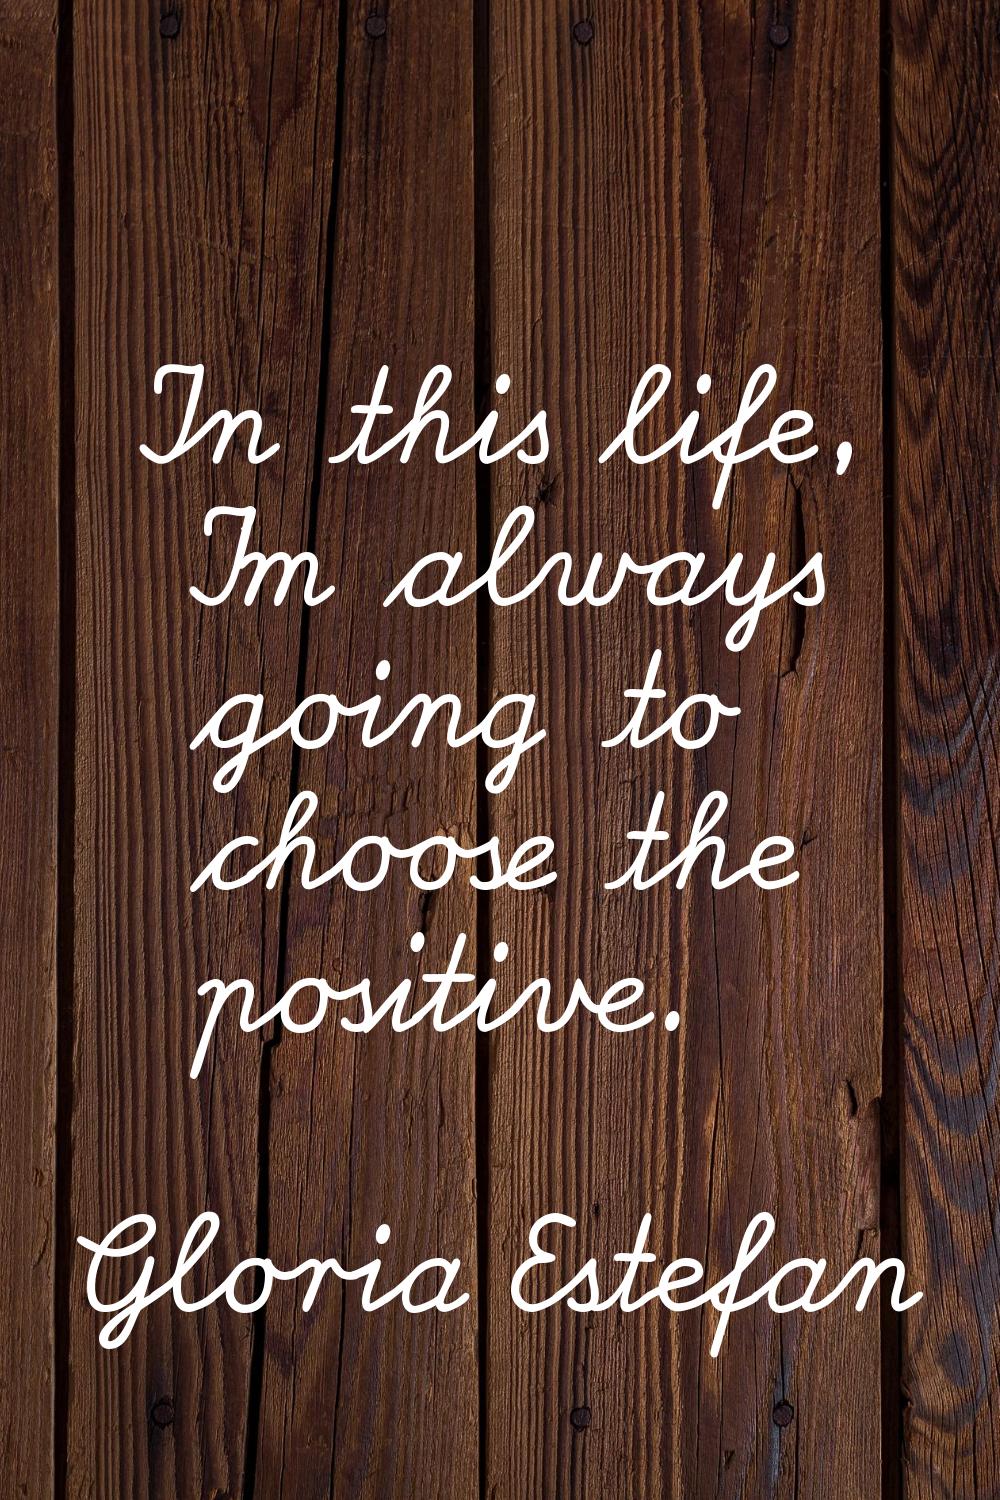 In this life, I'm always going to choose the positive.